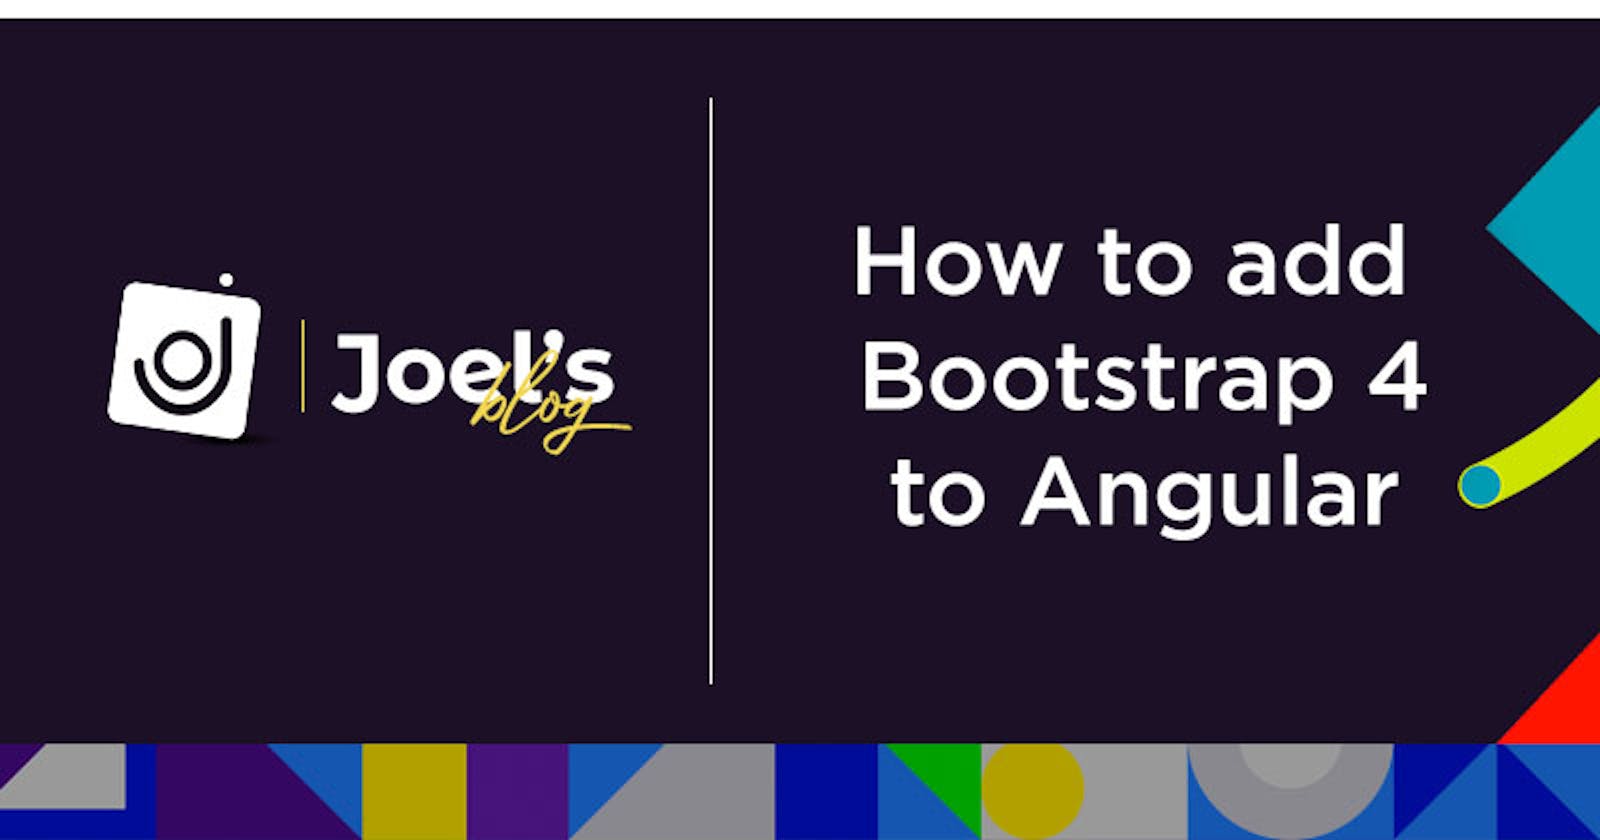 How to Add Bootstrap 4 to Angular